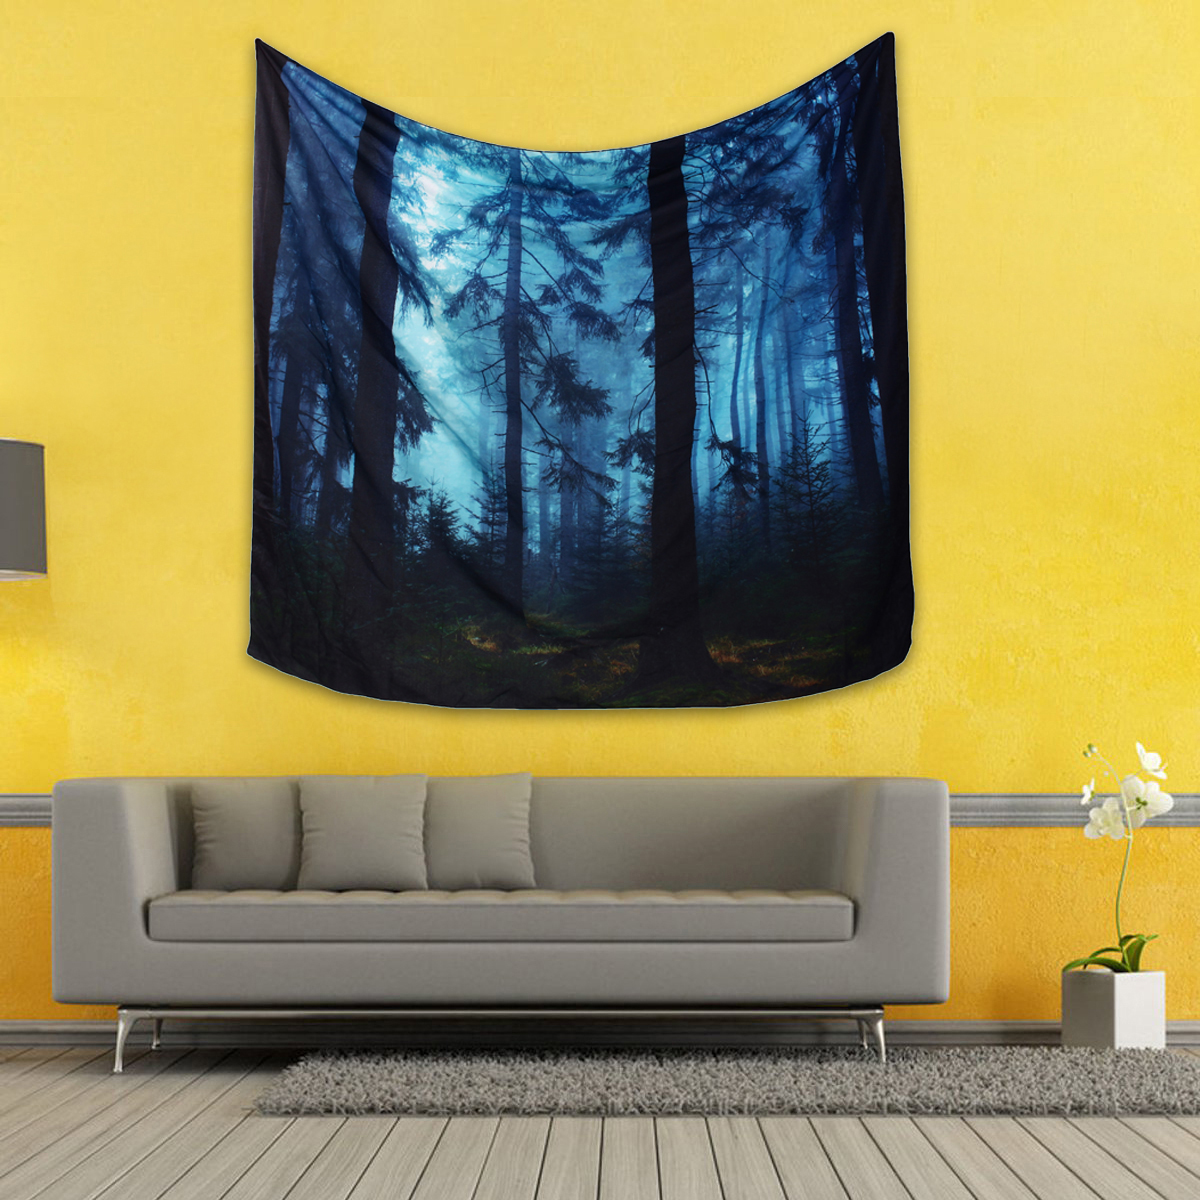 Forest-World-Map-Tapestries-Wall-Hanging-Paper-Tapestry-Bedspread-Dorm-Decor-1436138-5